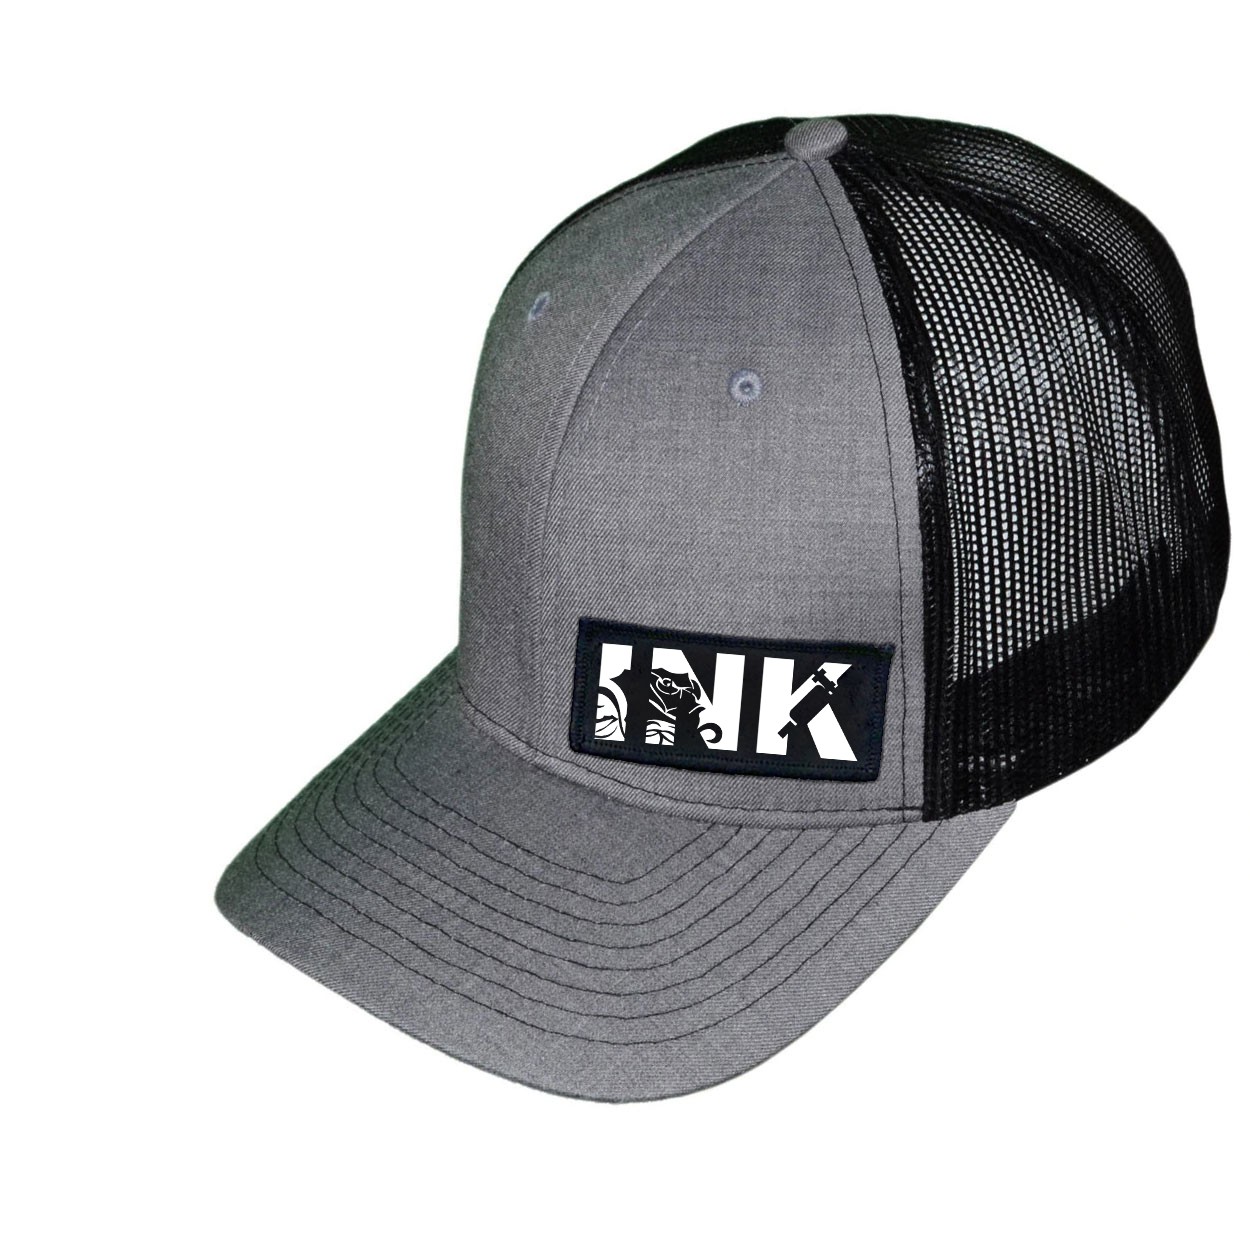 Ink Tattoo Logo Night Out Woven Patch Snapback Trucker Hat Heather Gray/Black